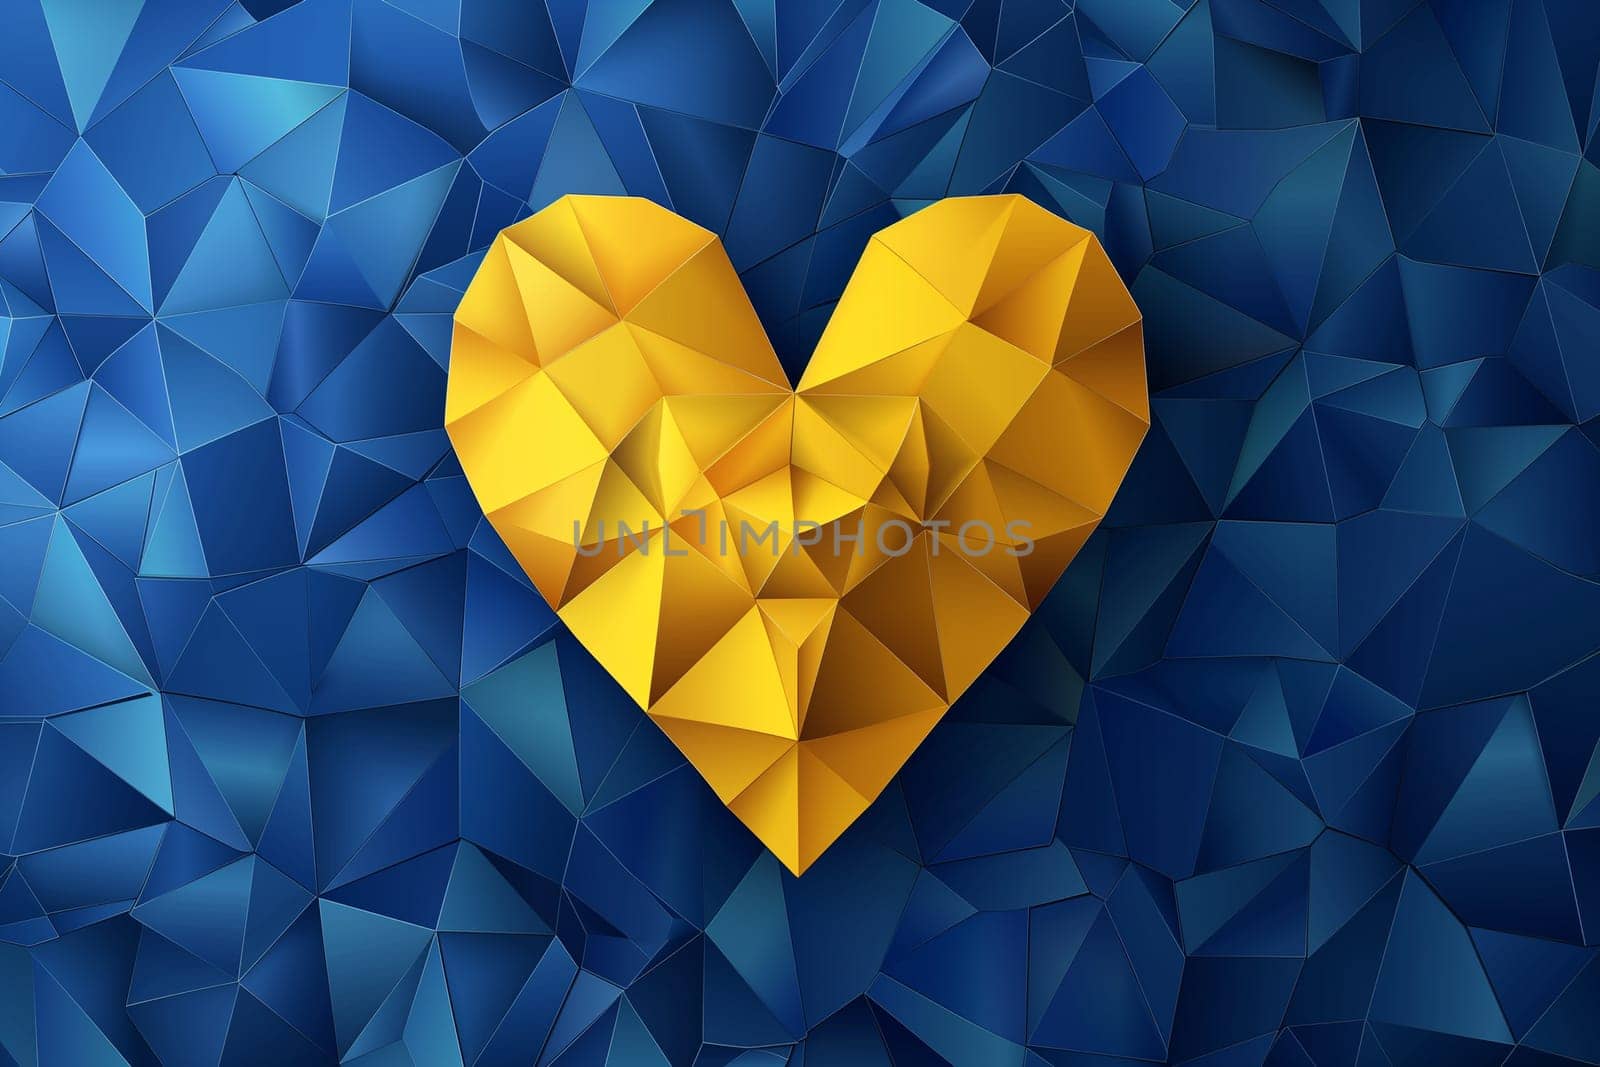 A vibrant yellow heart stands out against a bold blue background, creating a striking contrast.